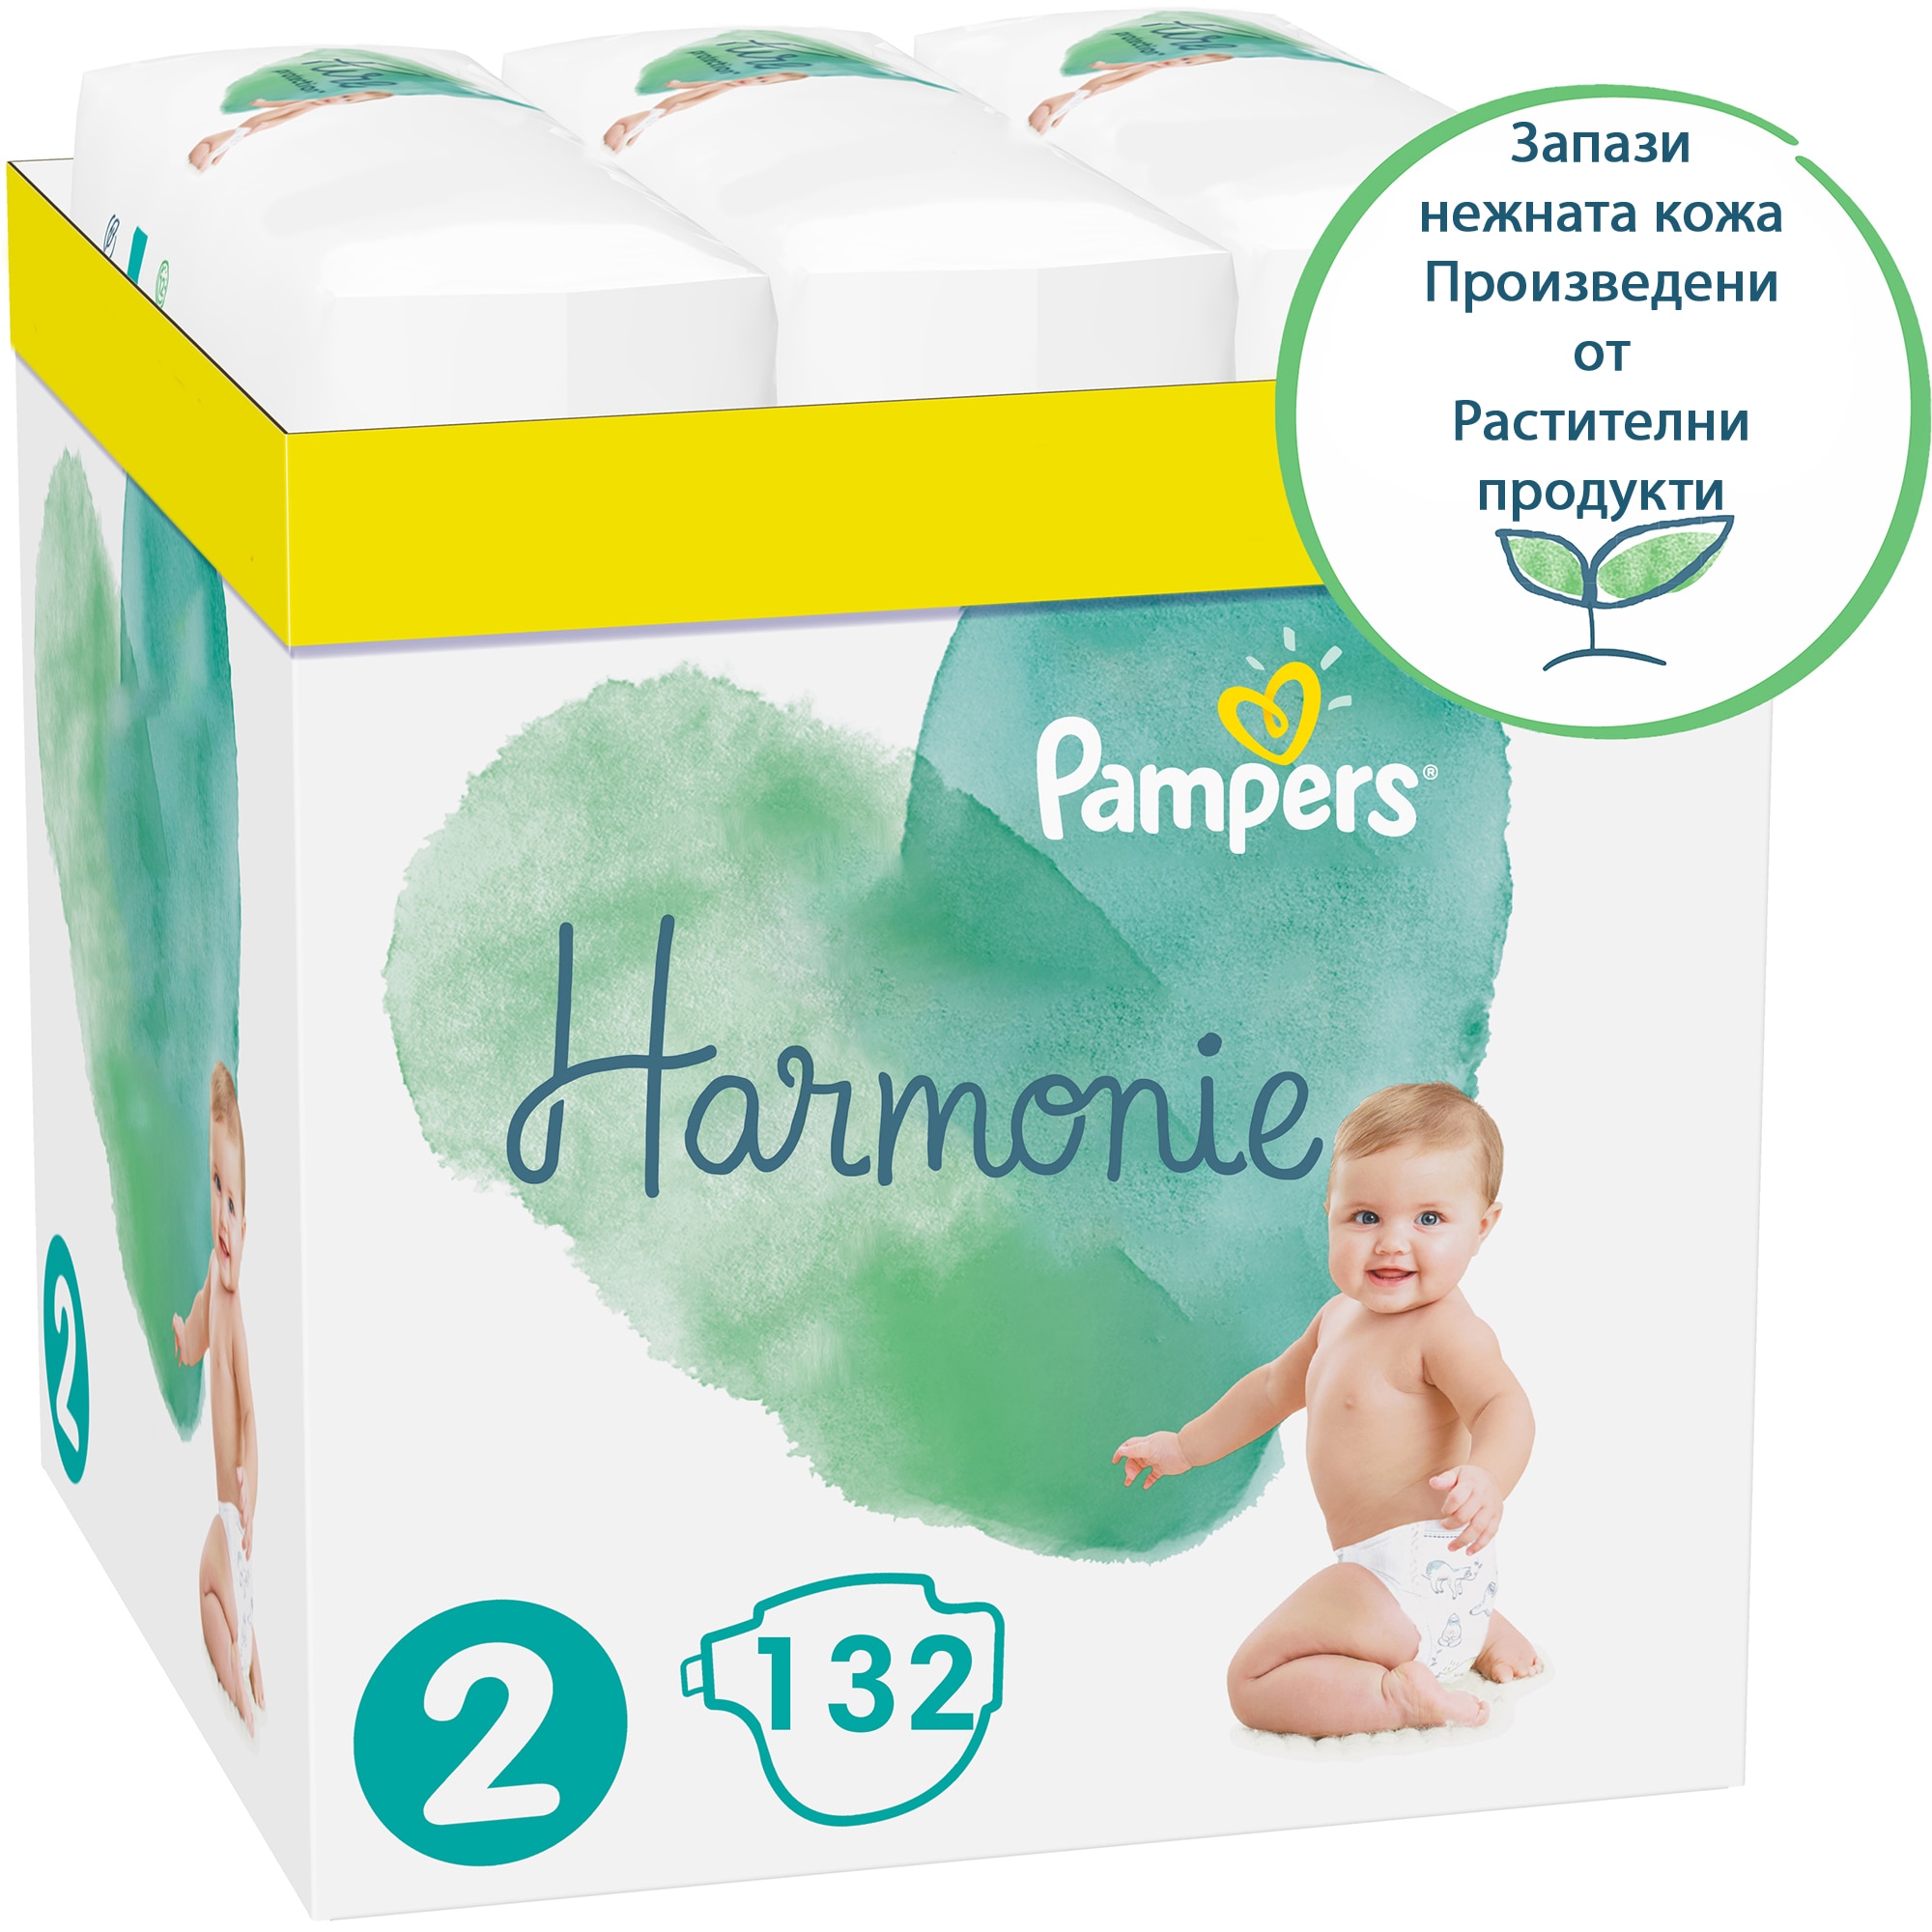 Pampers Harmony (Taille 2, 132 pièce(s), Pack semi-mensuel) - Galaxus